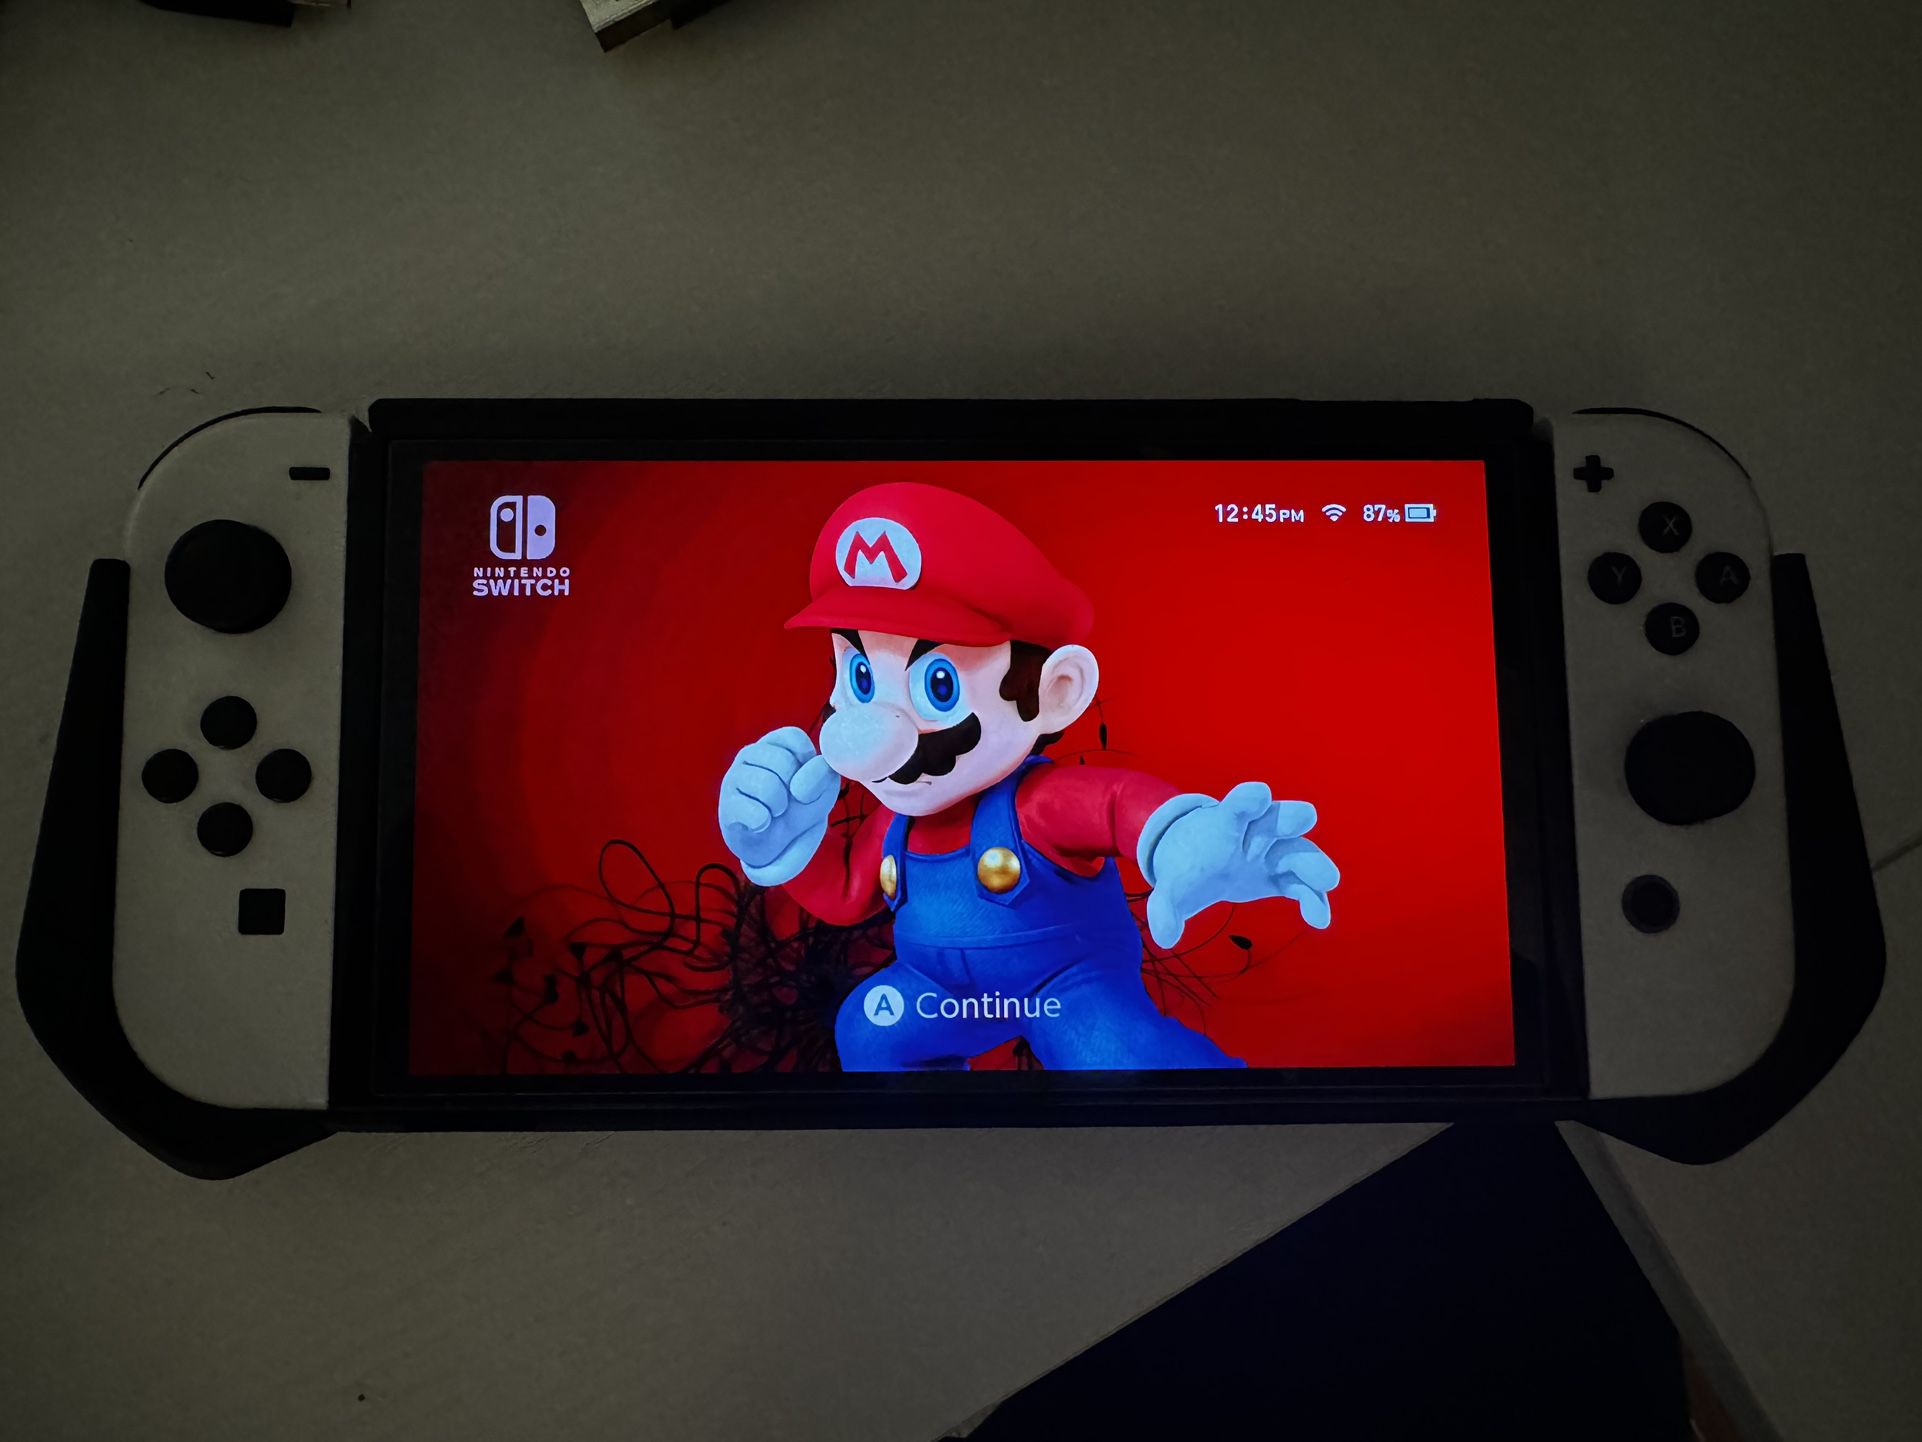 Modded Nintendo Switch Oled With 256gb Sd Card, With Cases